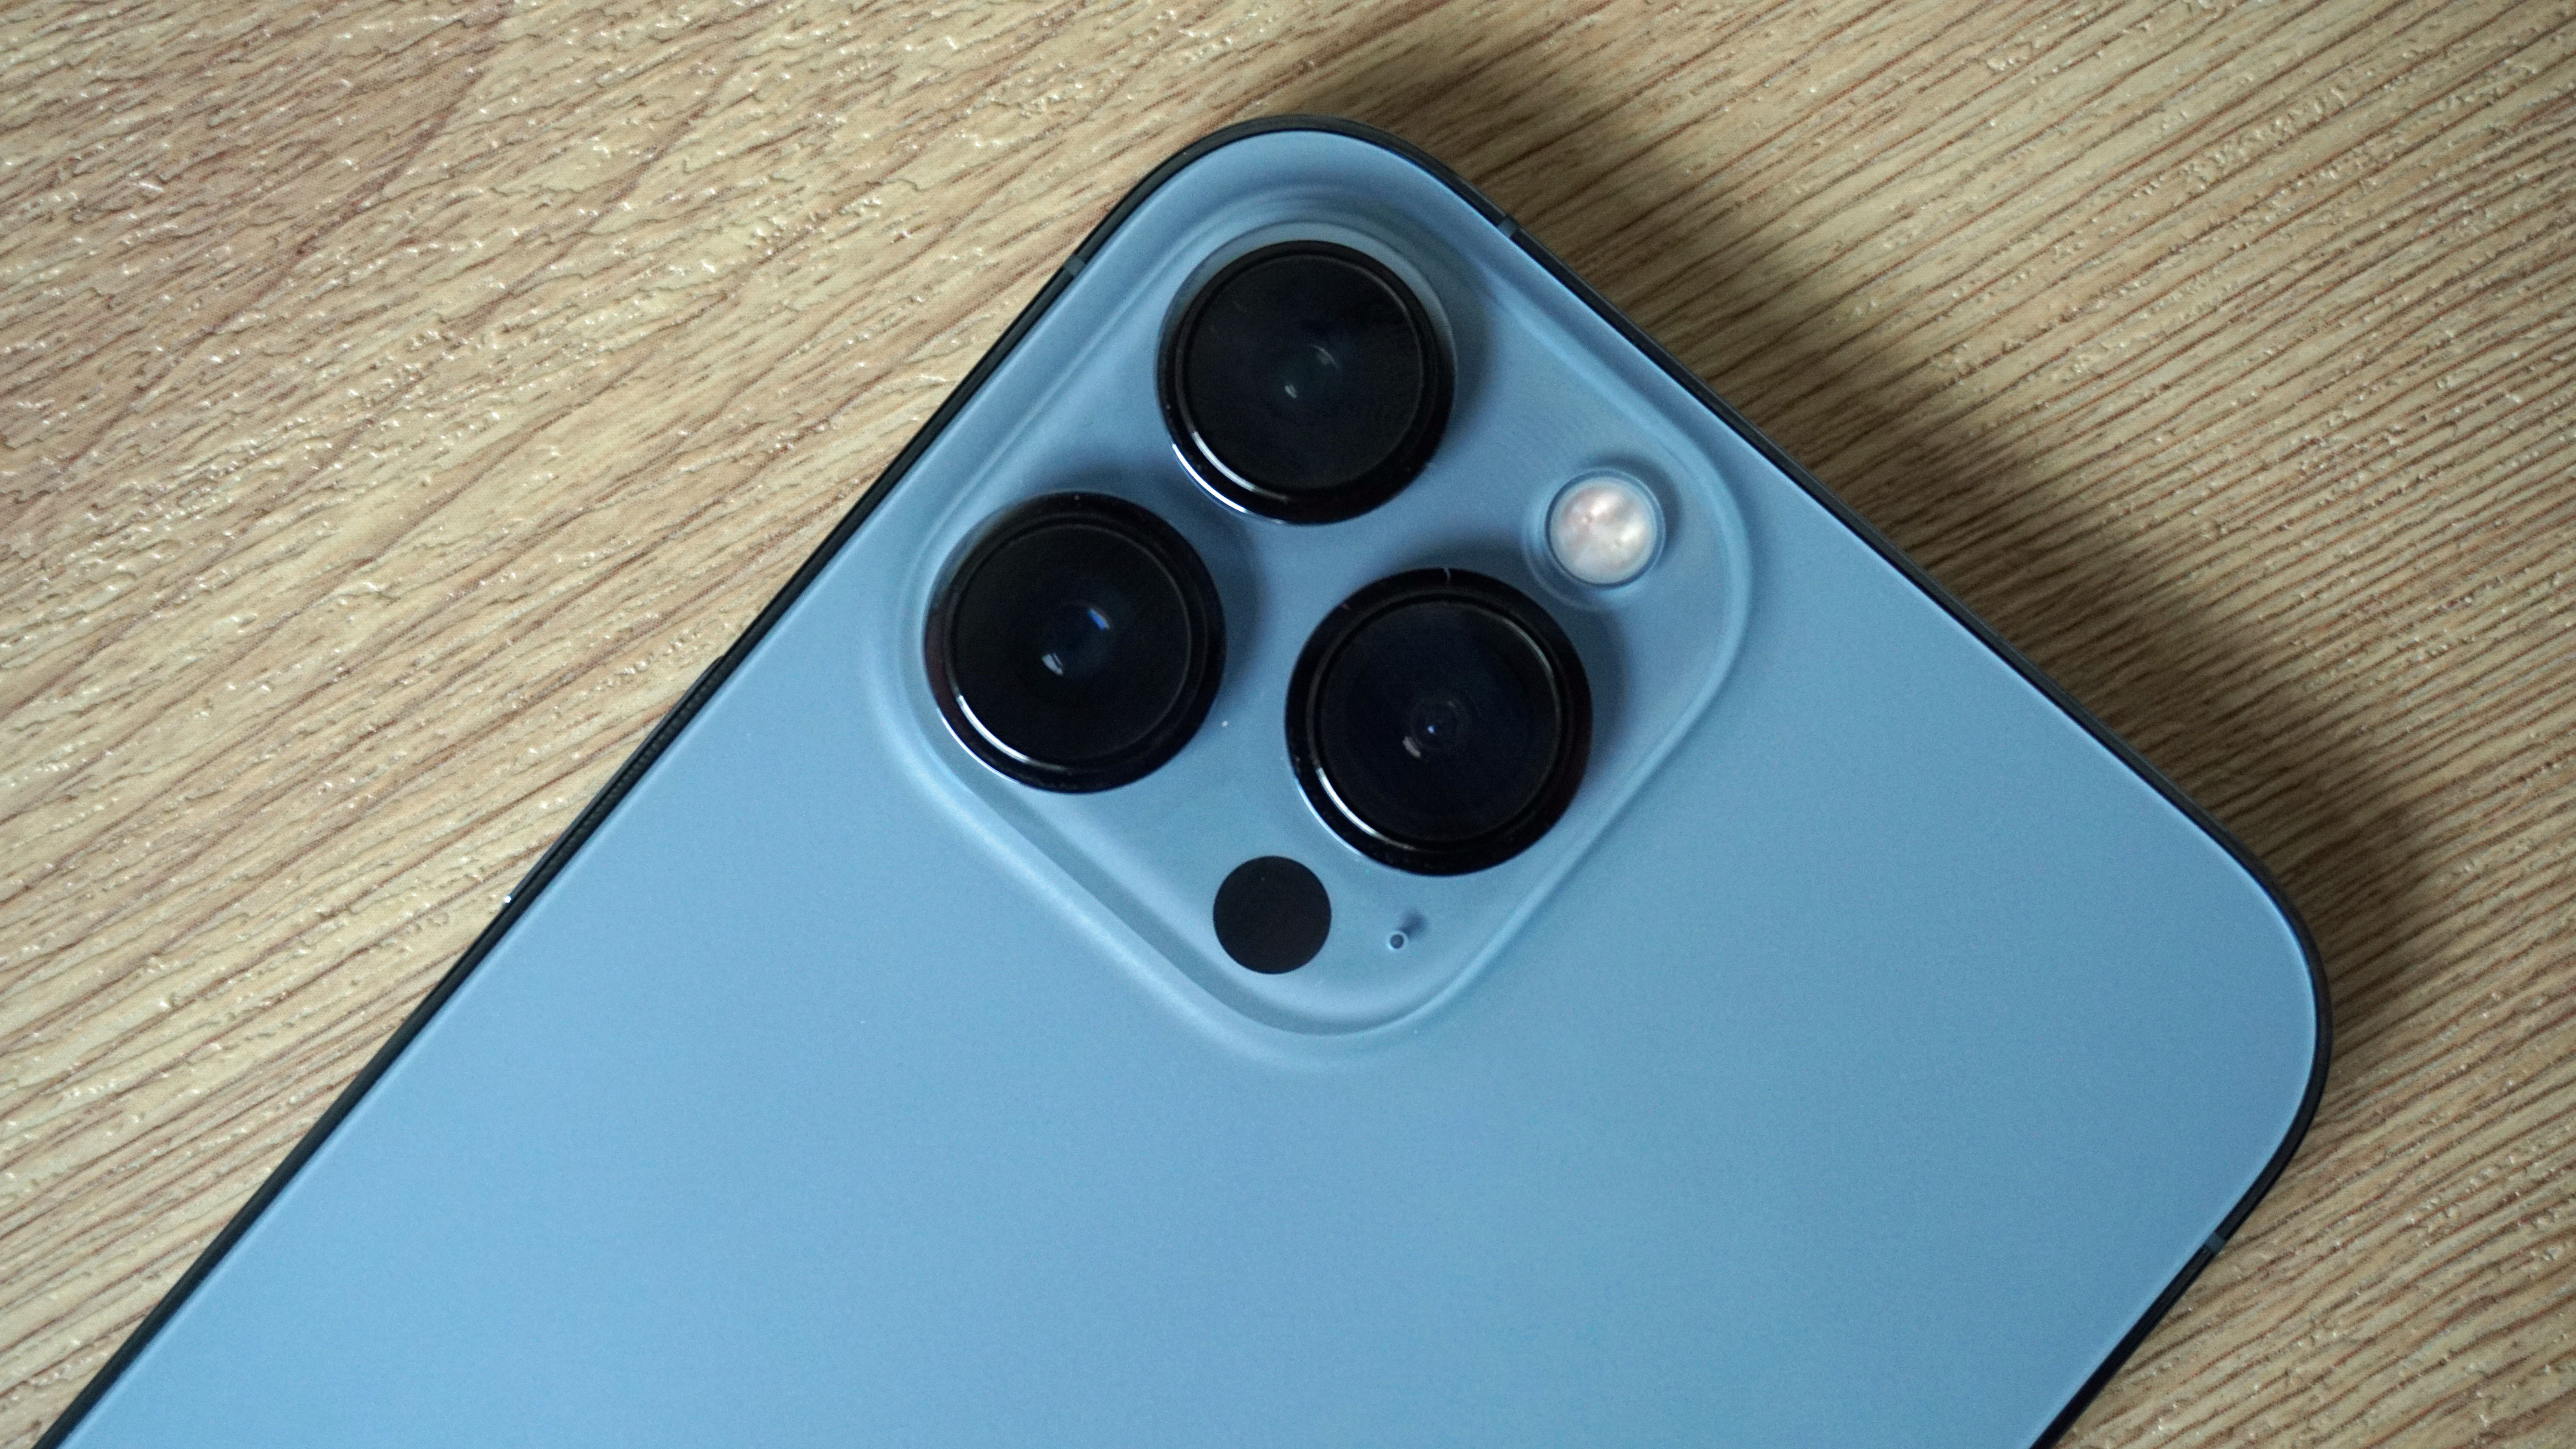 A close-up of the rear cameras on the iPhone 13 Pro Max